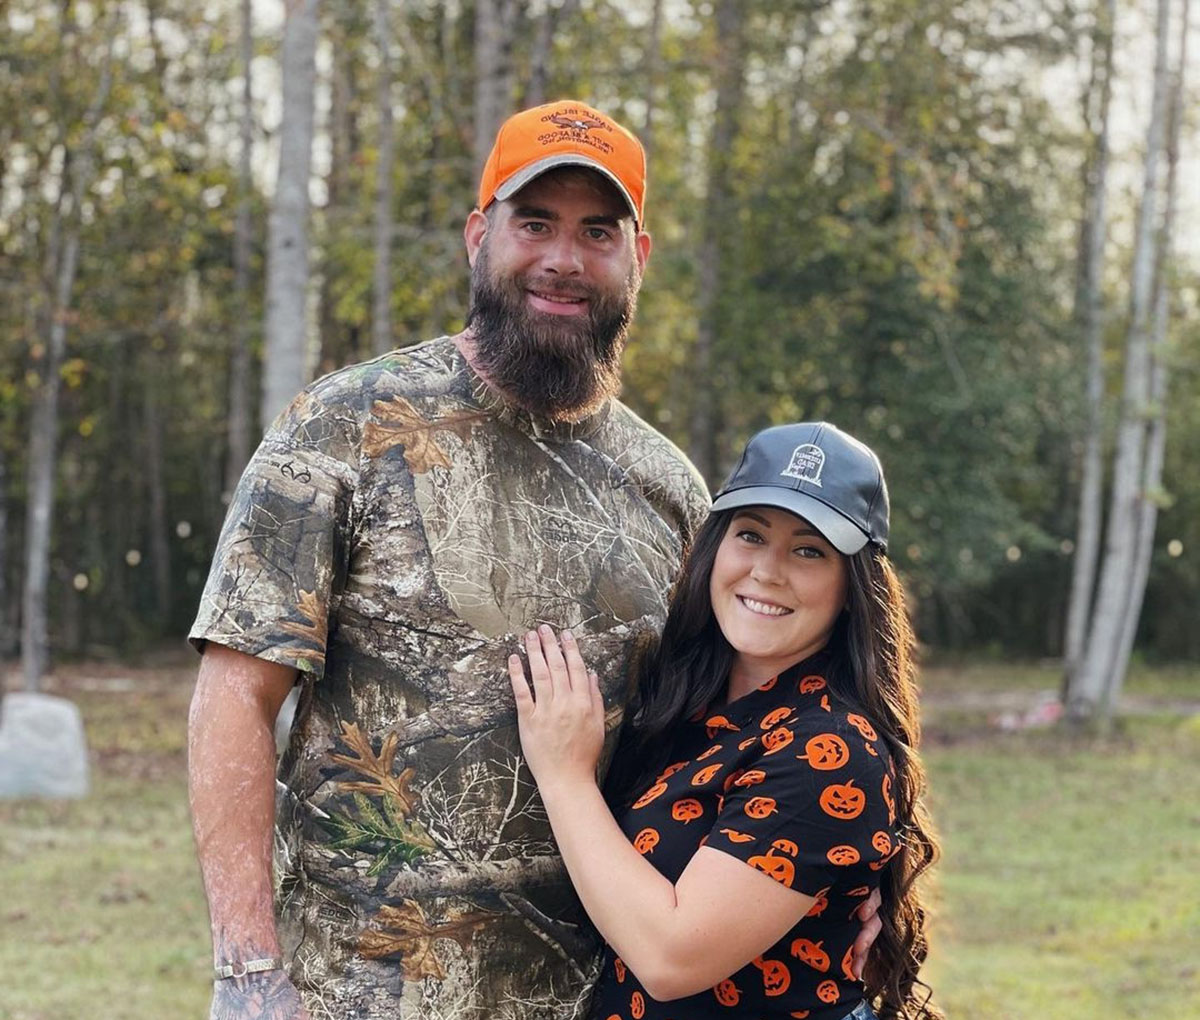 Teen Mom Jenelle Evans' Home Targeted In Attempted Break-In